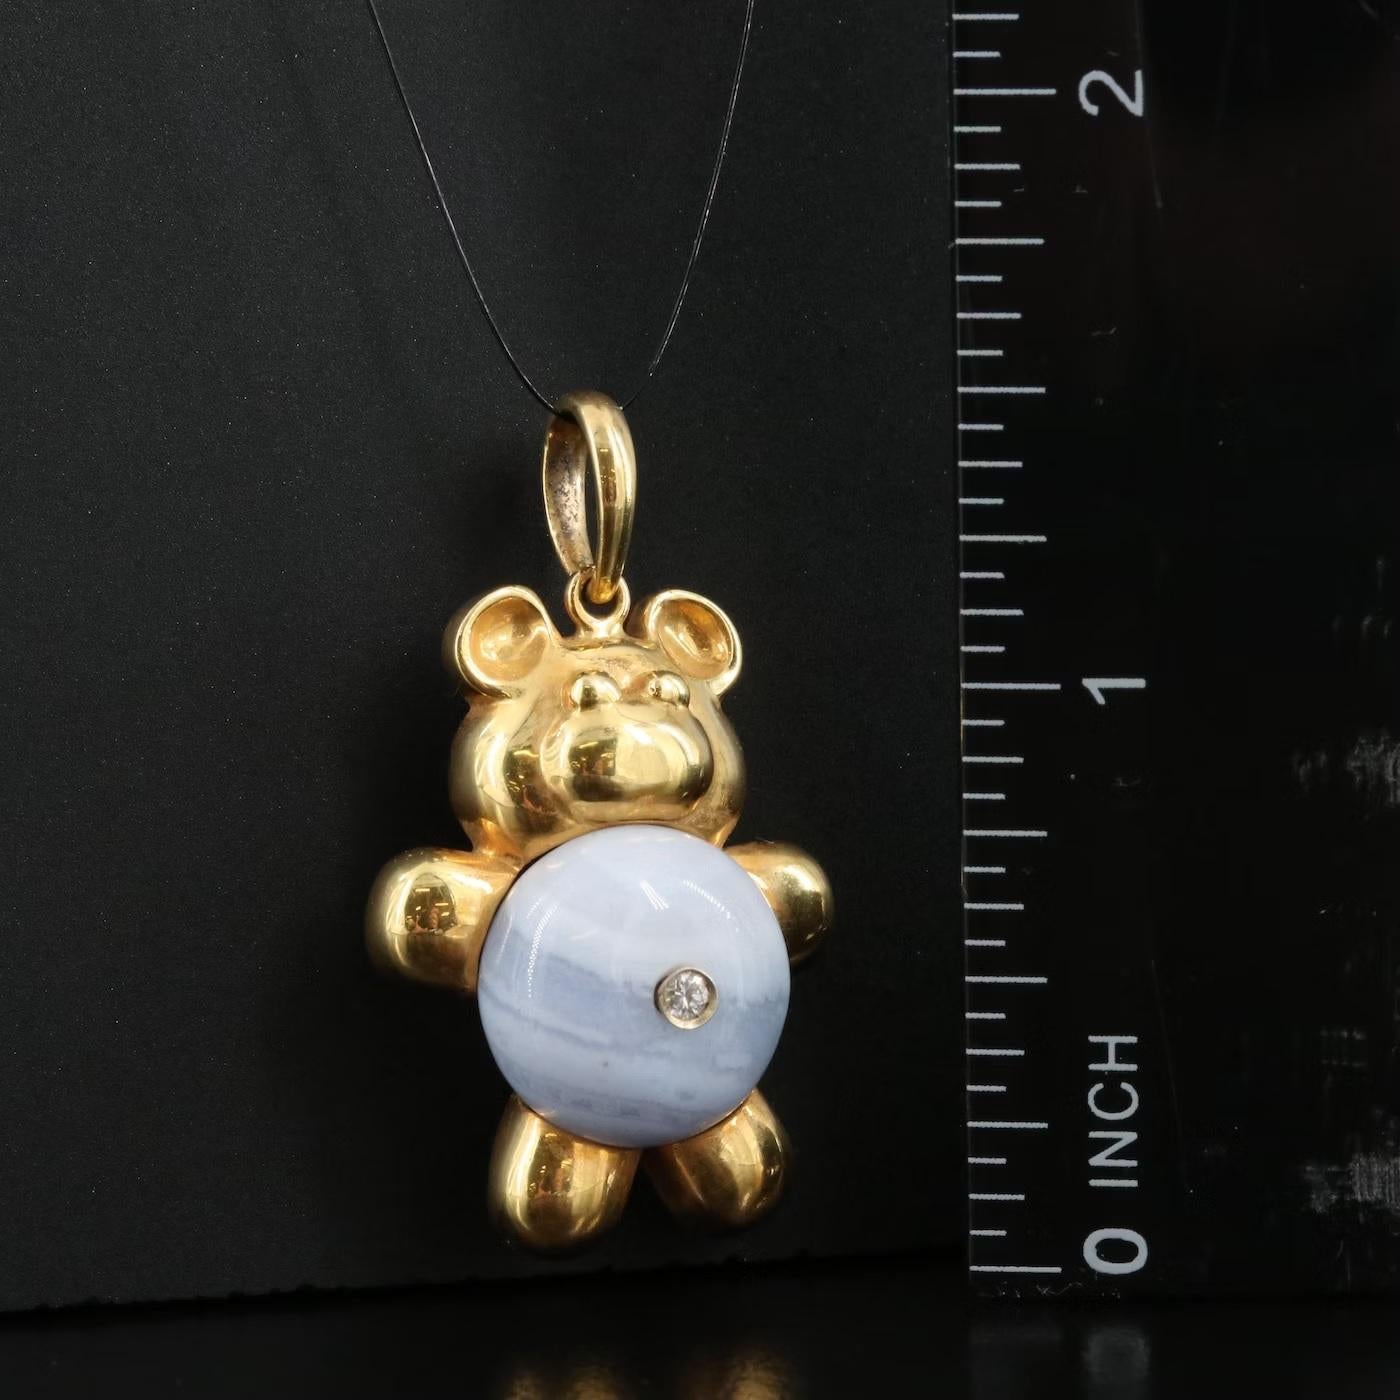 Round Cut $4450 / New / 18K Gold / Damiani Diamond Agate 3D Bear Pendant with Box / ITALY For Sale